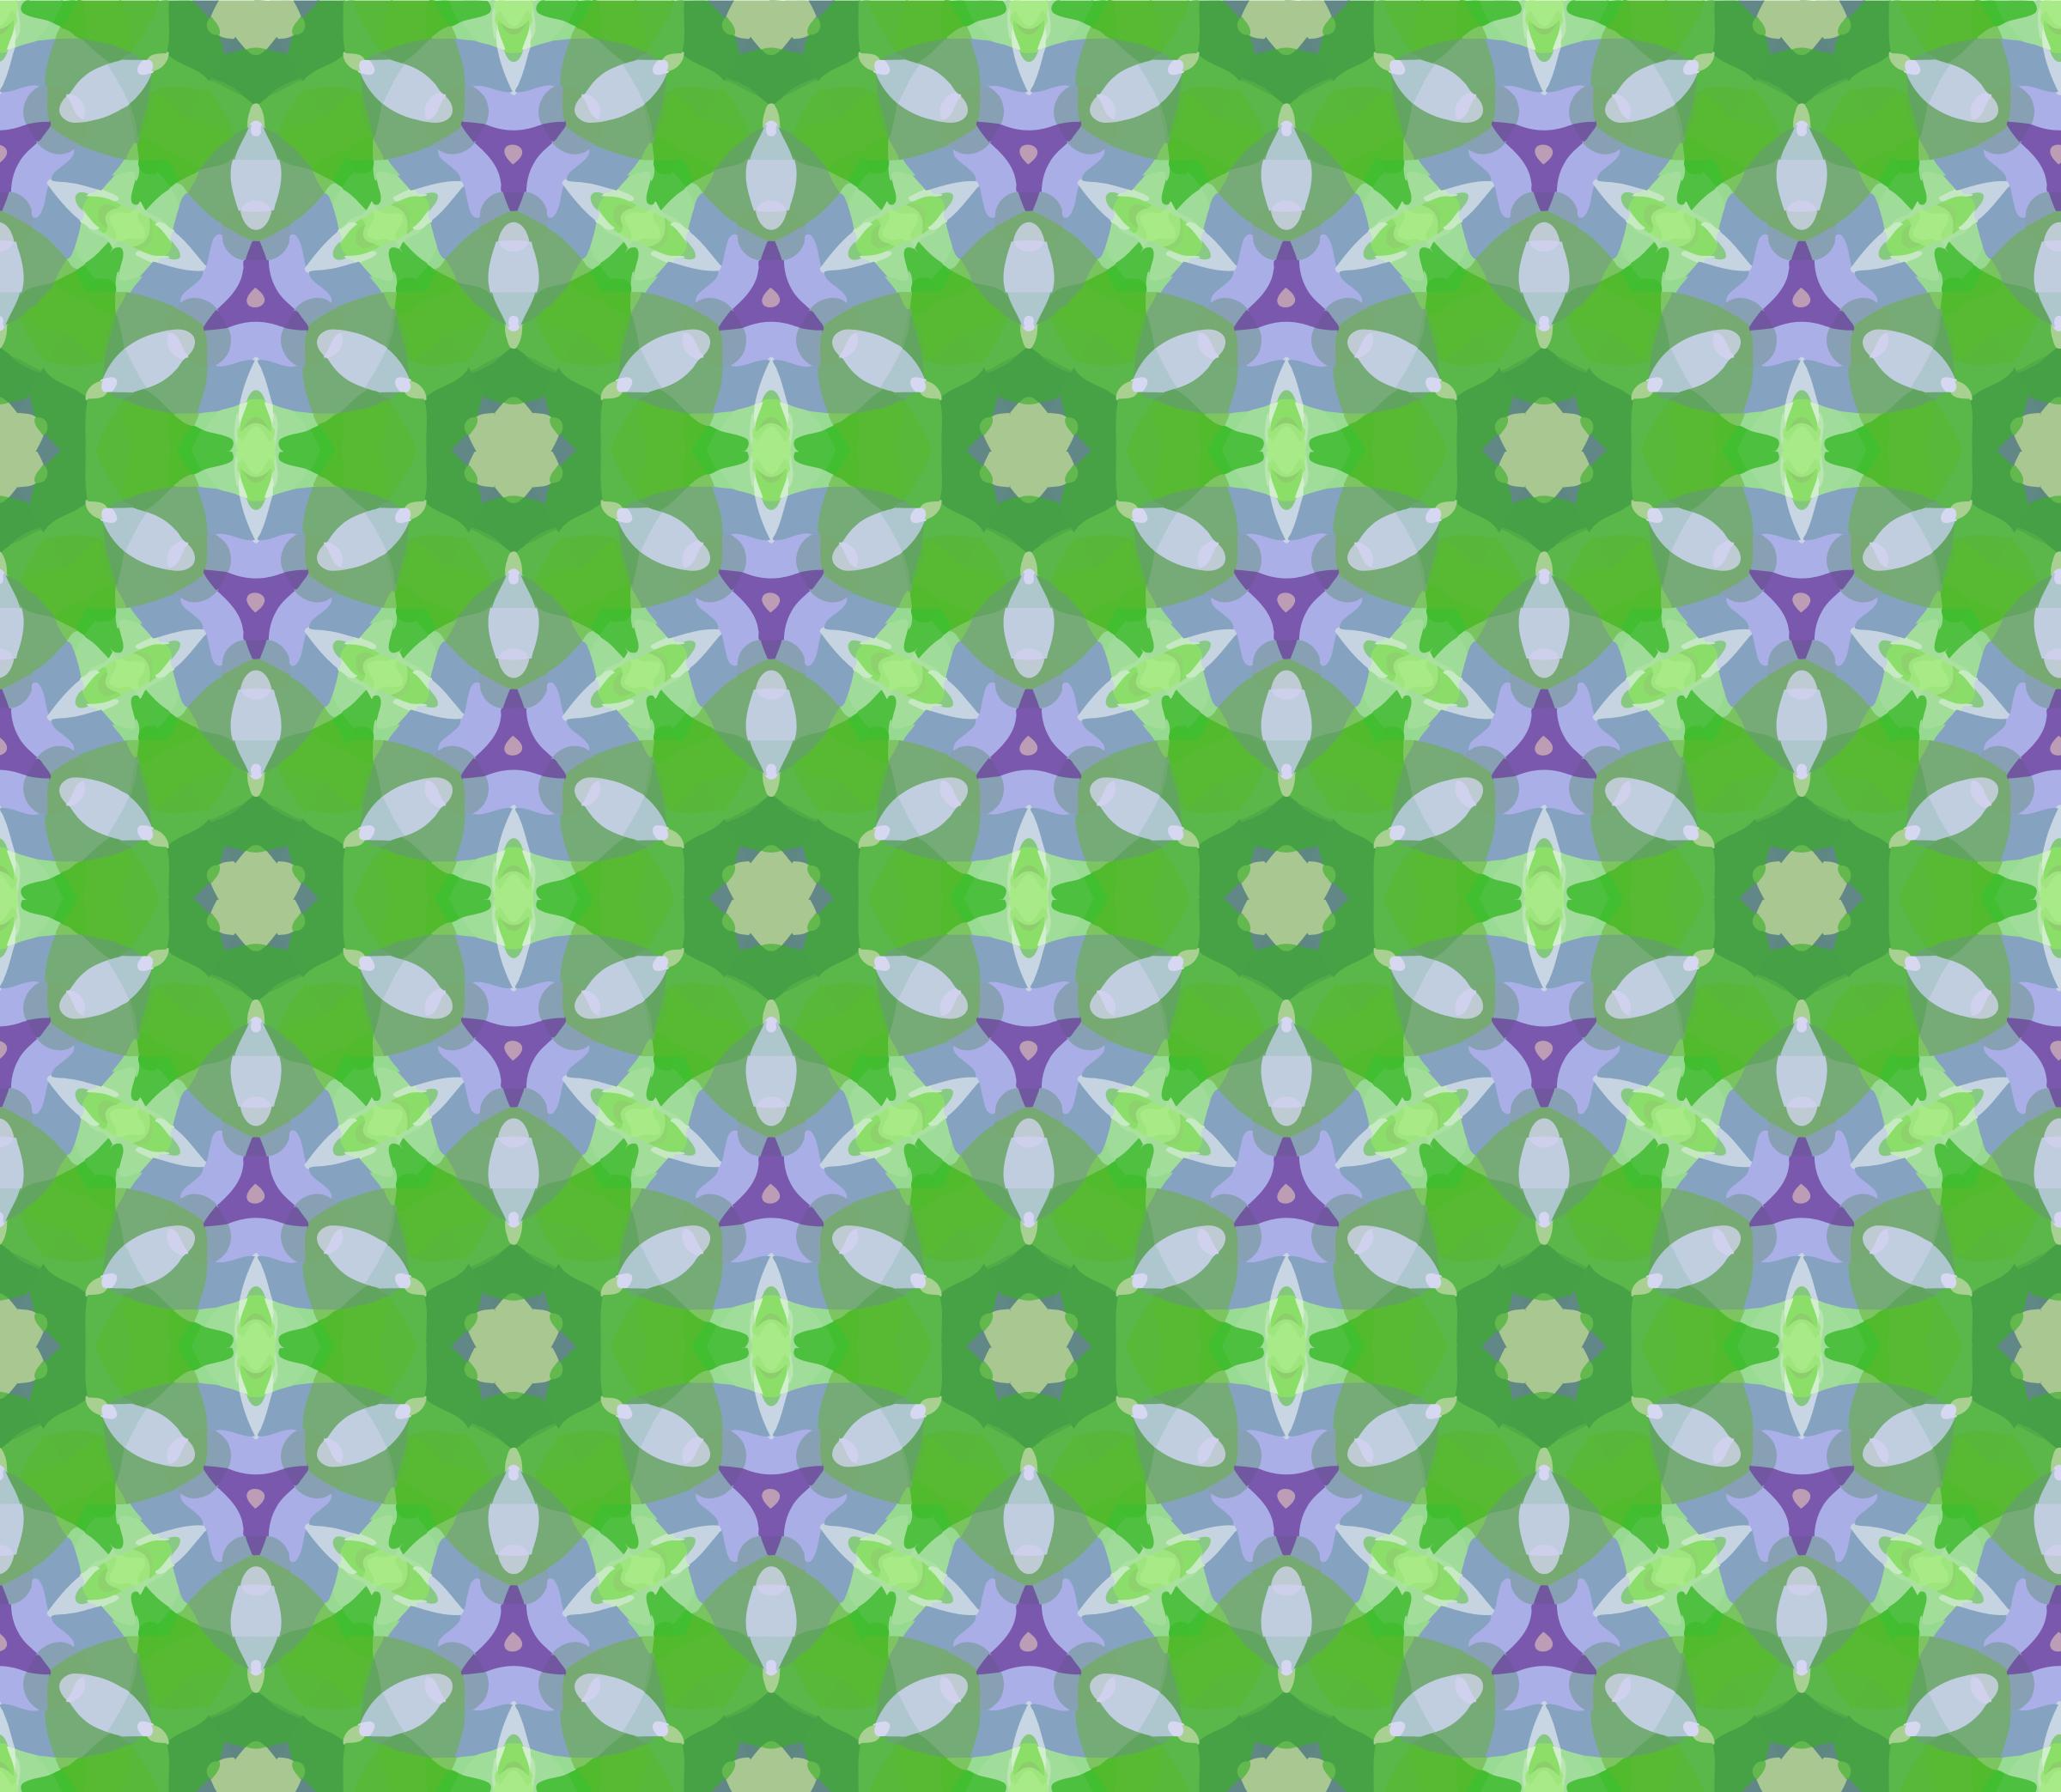 Background pattern green icons